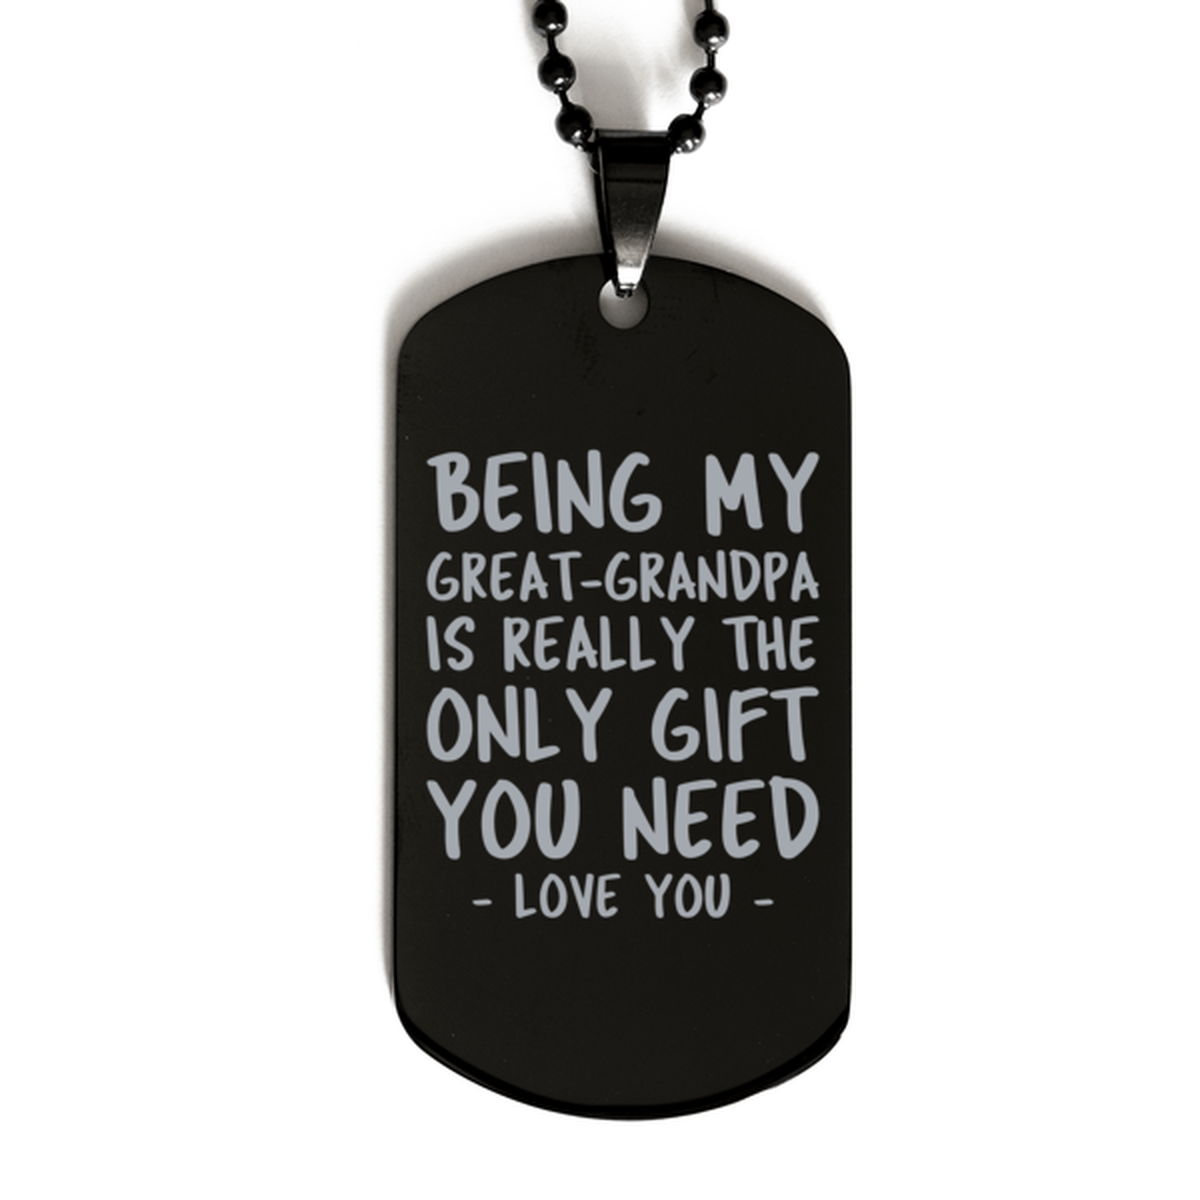 Funny Great-grandpa Black Dog Tag Necklace, Being My Great-grandpa Is Really the Only Gift You Need, Best Birthday Gifts for Great-grandpa